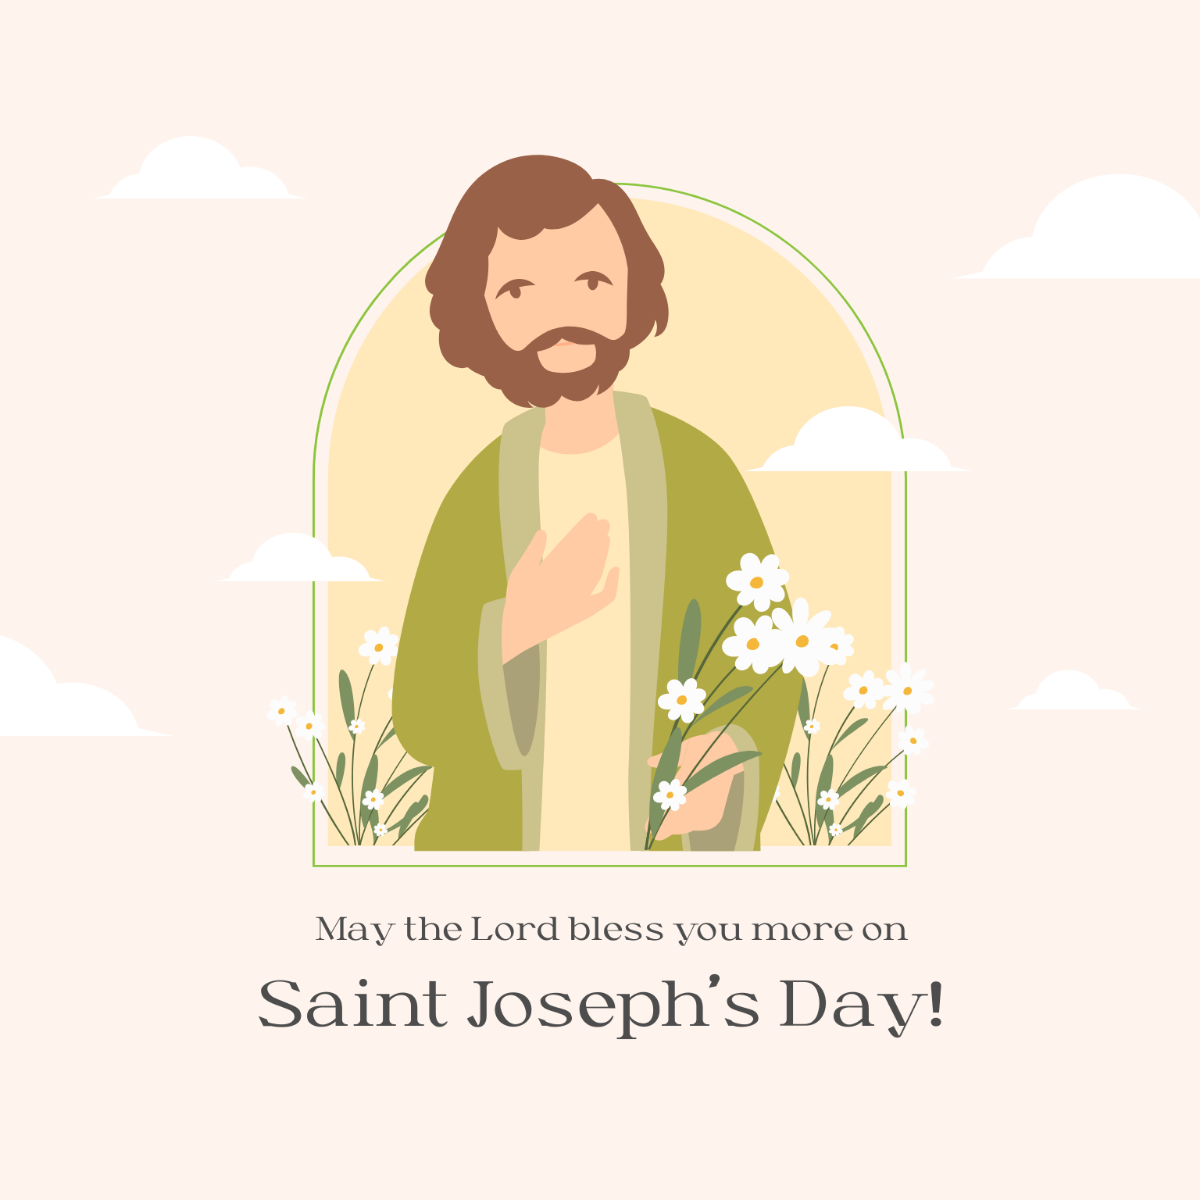 Free Saint Joseph's Day Wishes Vector Template